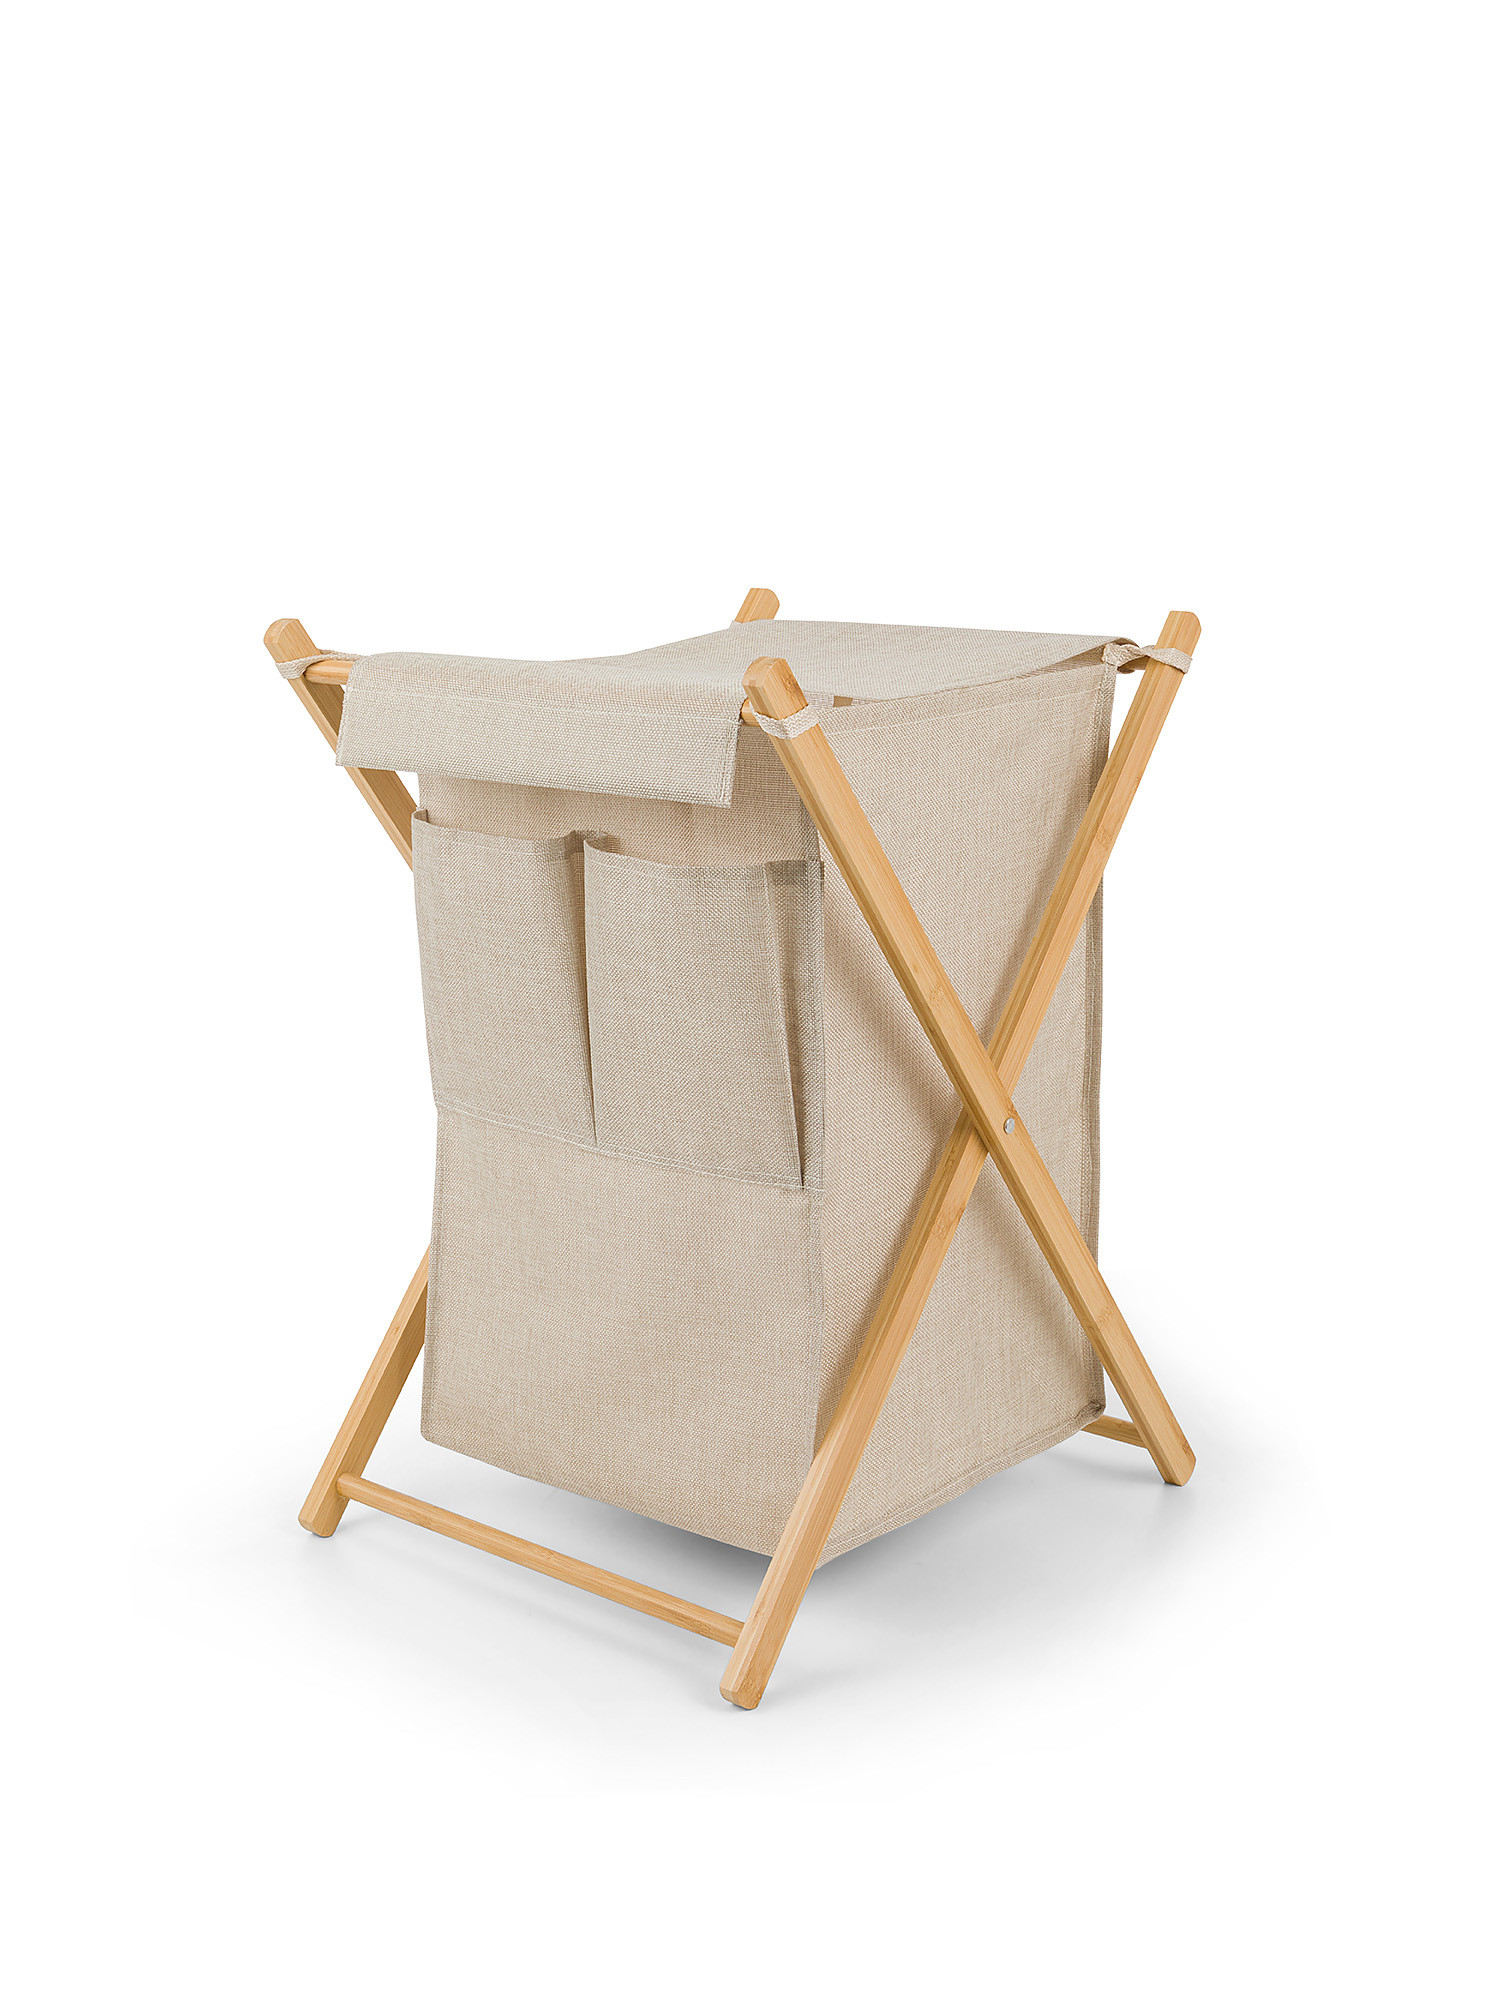 Woven and bamboo laundry basket, Beige, large image number 0